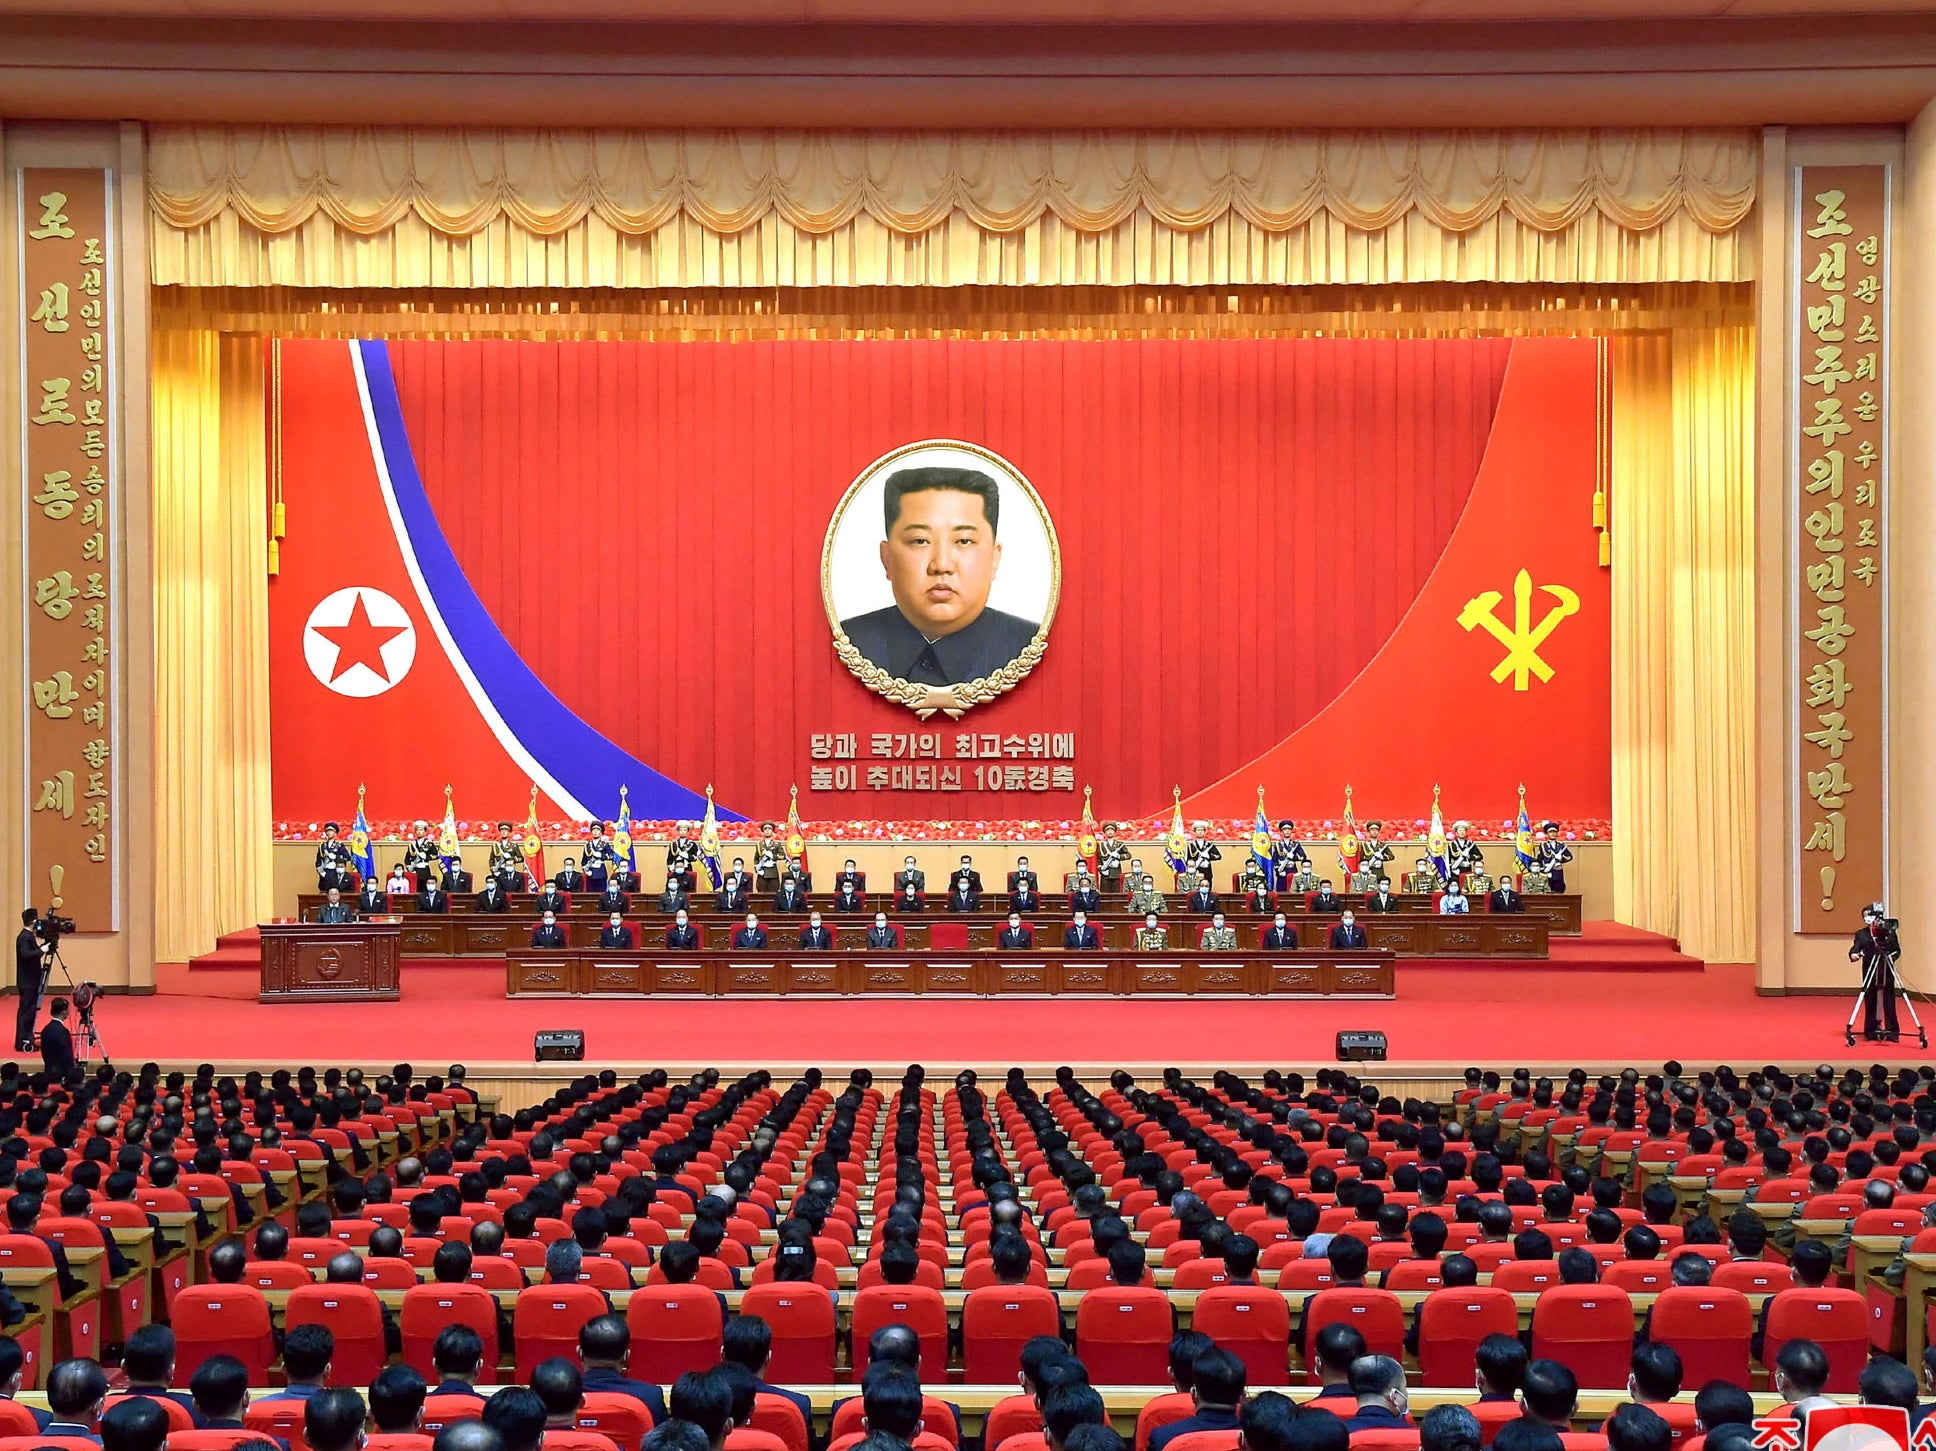 A portrait of North Korea’s leader Kim Jong Un is displayed at a national meeting to commemorate Kim’s 10-year anniversary as head of the country’s ruling Workers’ Party of Korea (WPK) in Pyongyang